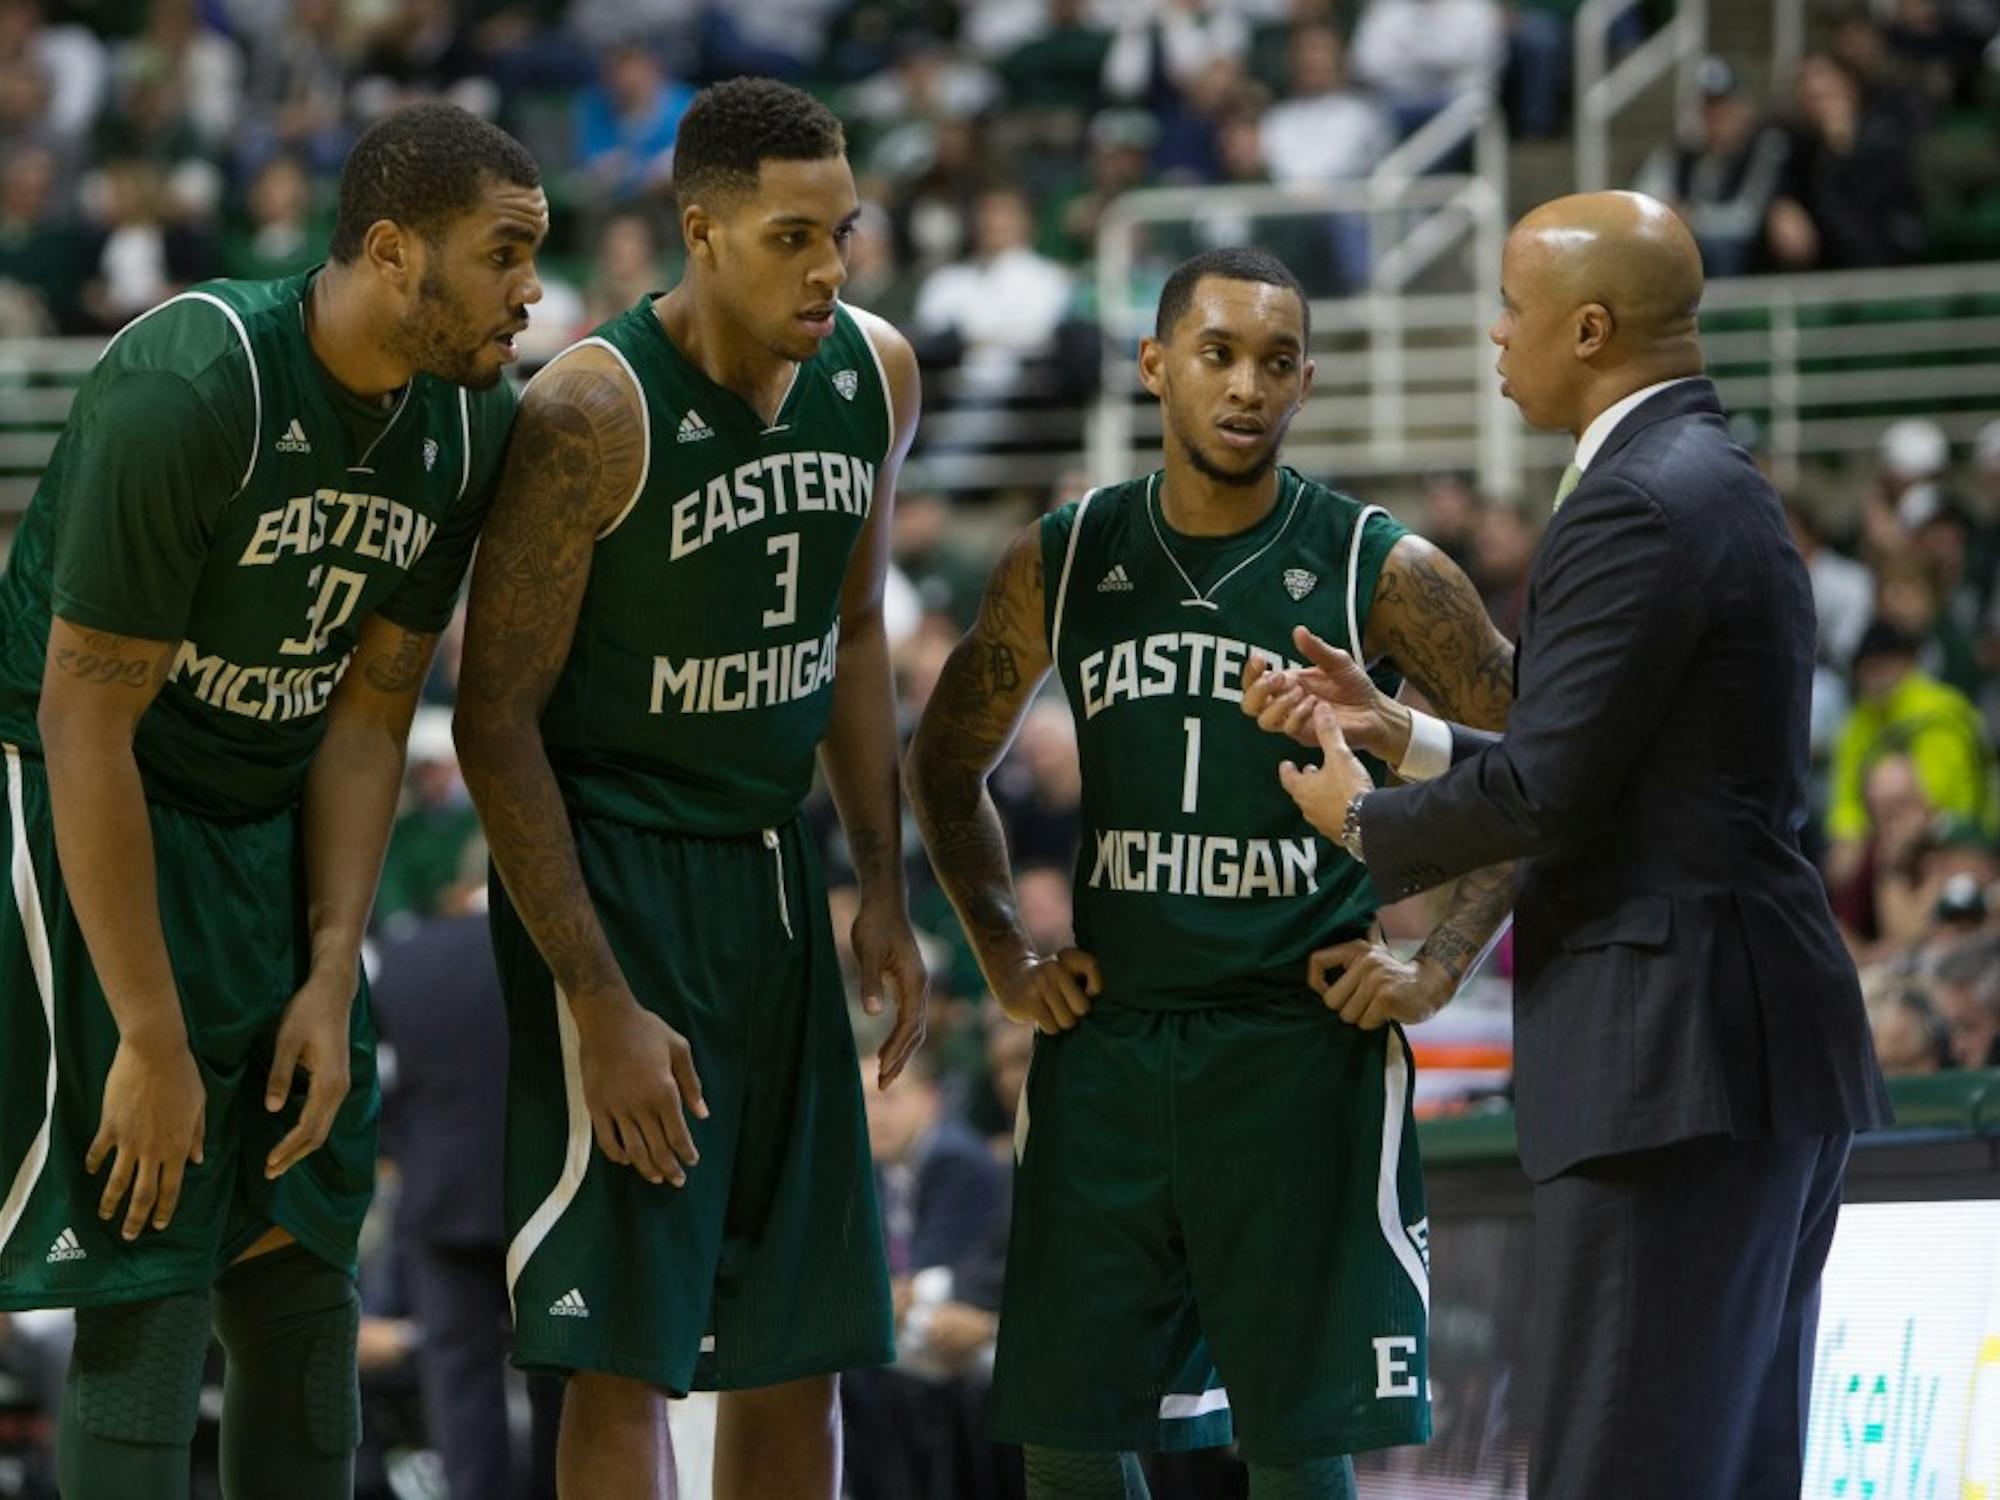 Eastern Michigan coach Rob Murphy instructs his team on what to do in their 66-46 loss to Michigan State in East Lansing Wednesday night.